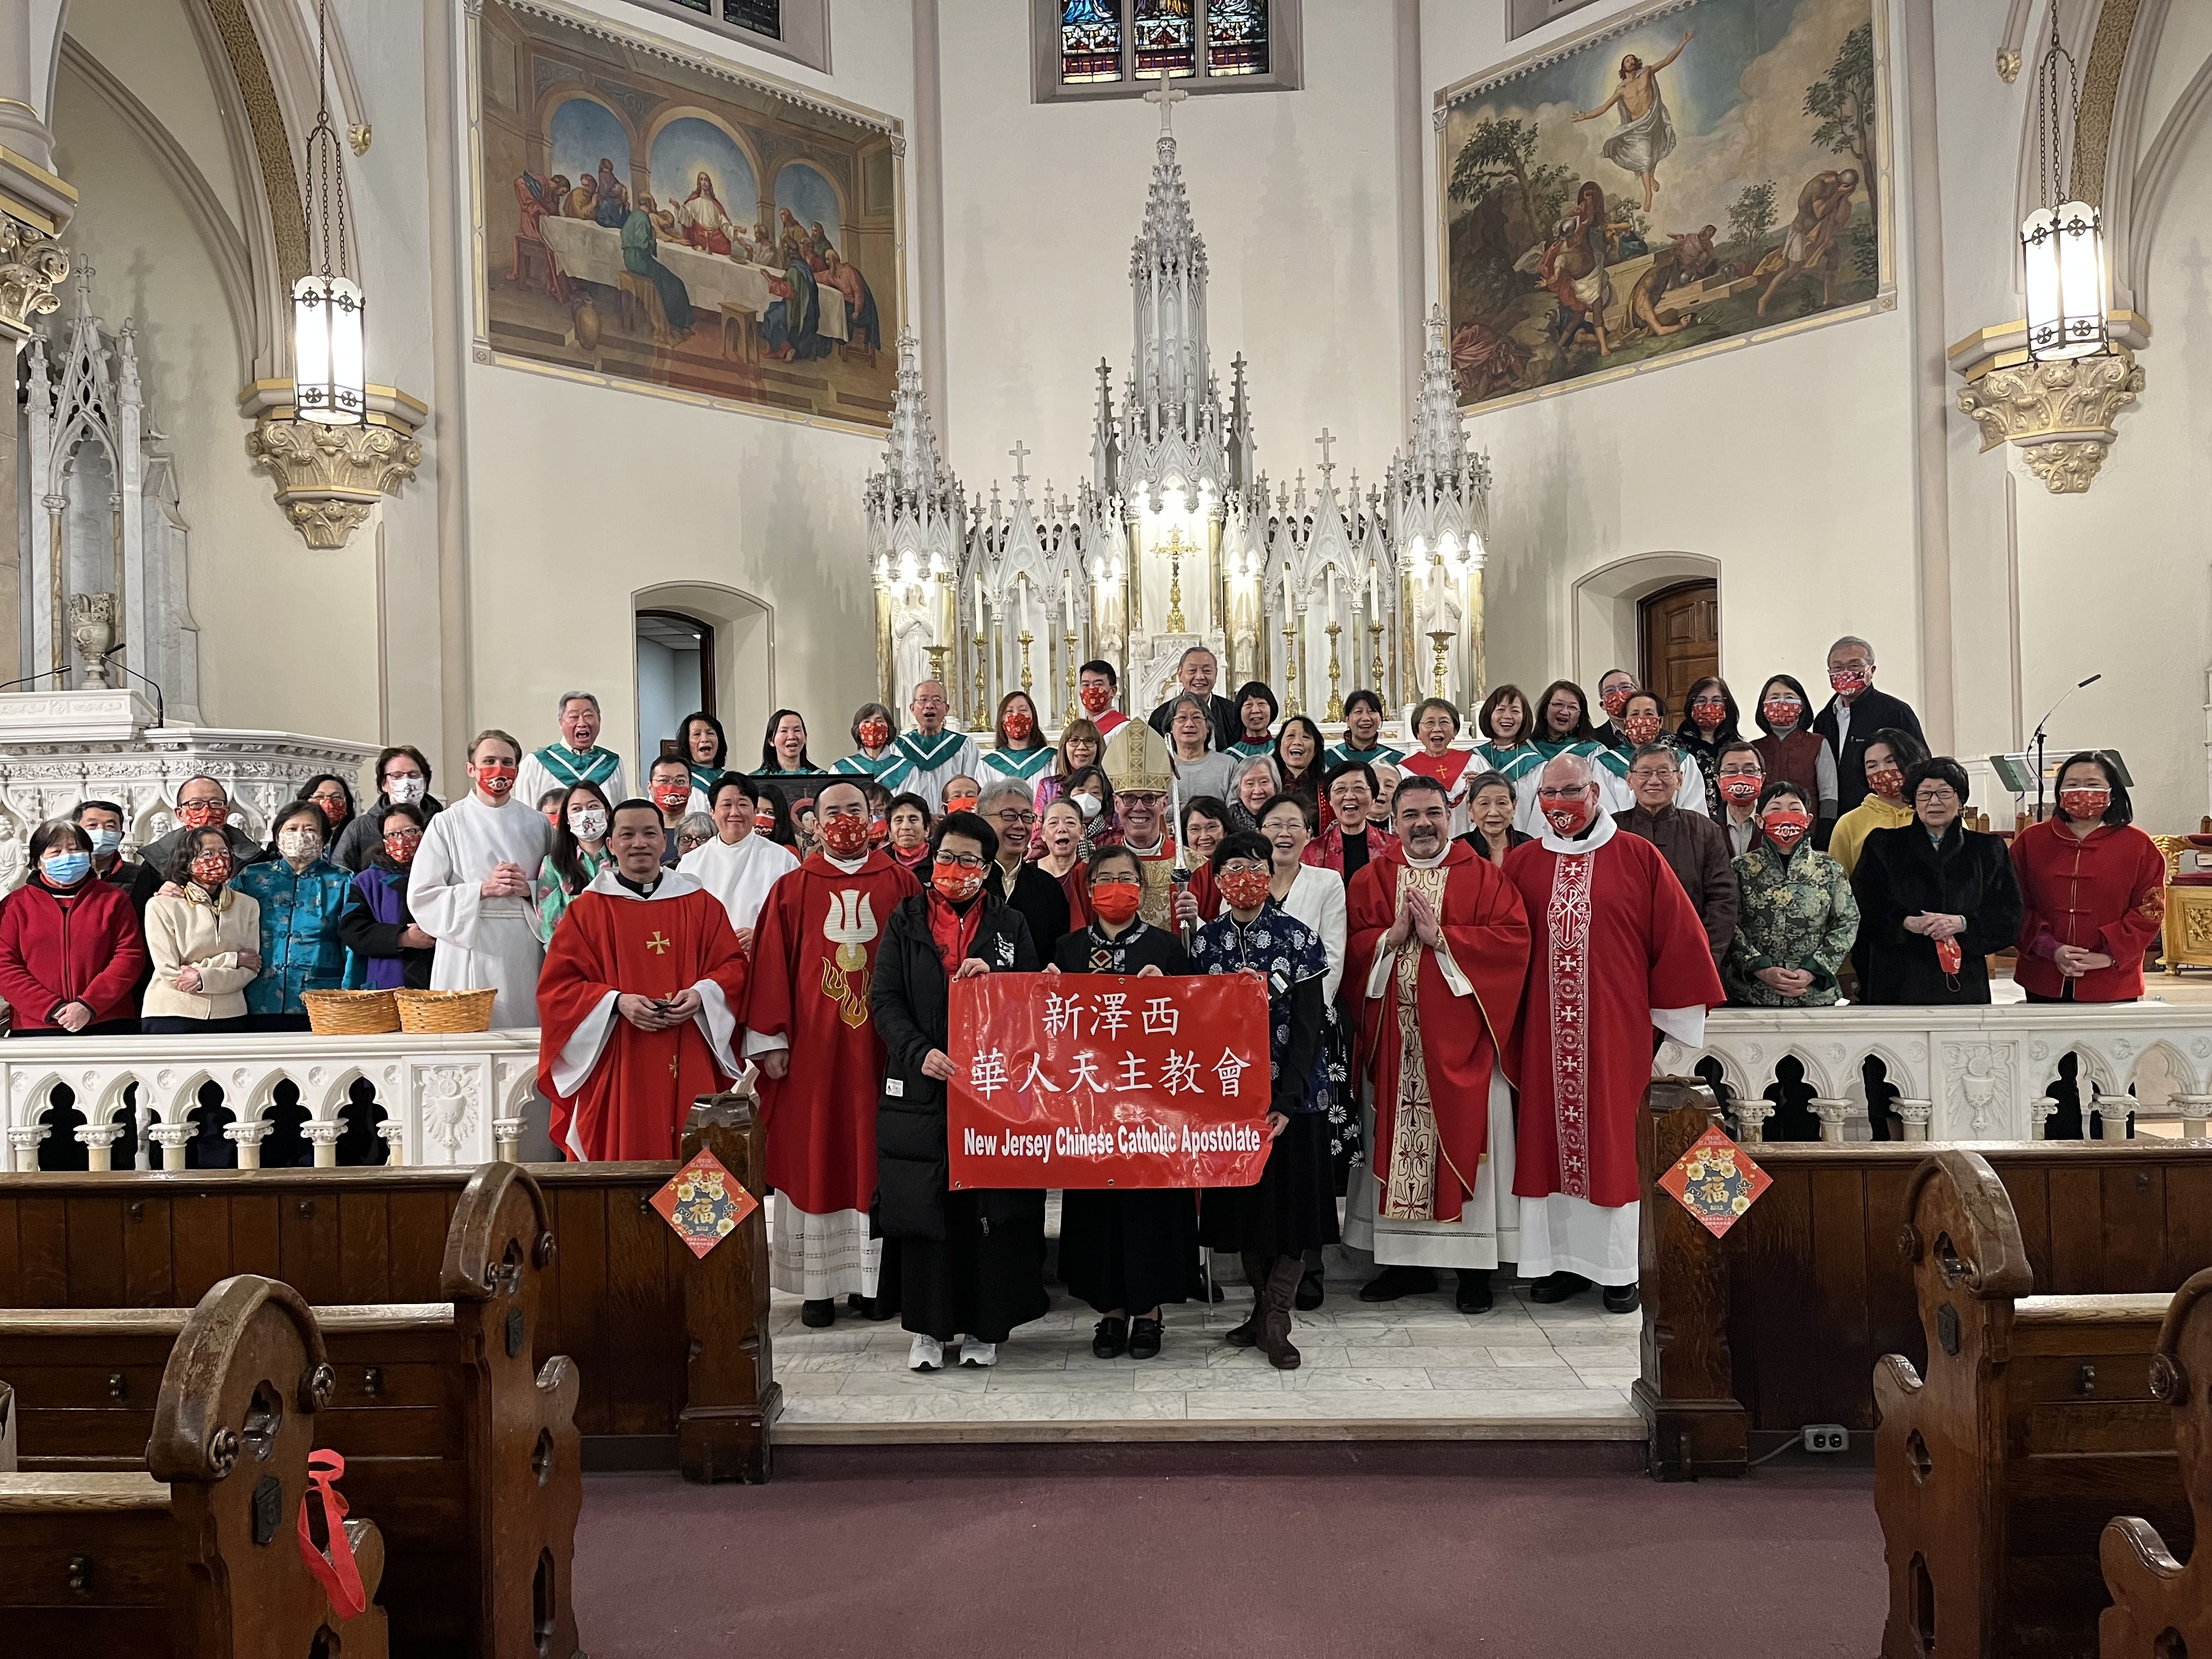 Featured image: On Sunday, Feb. 6, the Chinese Catholic Community of the Archdiocese of Newark and beyond joyfully celebrated the Chinese New Year, namely the Lunar New Year, at the Holy Cross Church, in Harrison, N.J (Photo courtesy of Sister Dong Hong Marie Zhang)